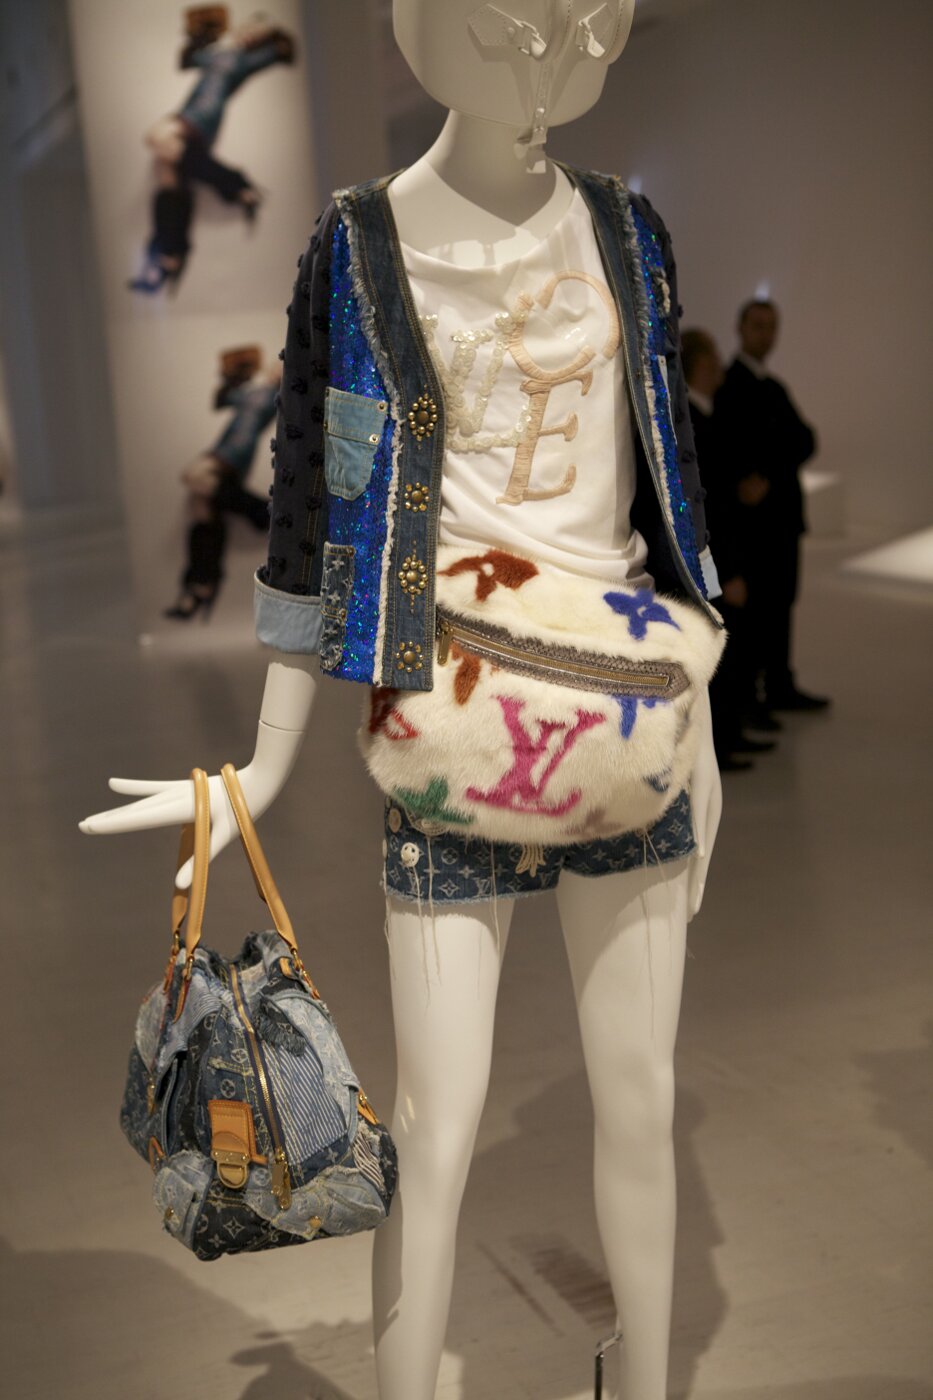 LOUIS VUITTON: THE ART OF FASHION EXHIBITION BY KATIE GRAND | The